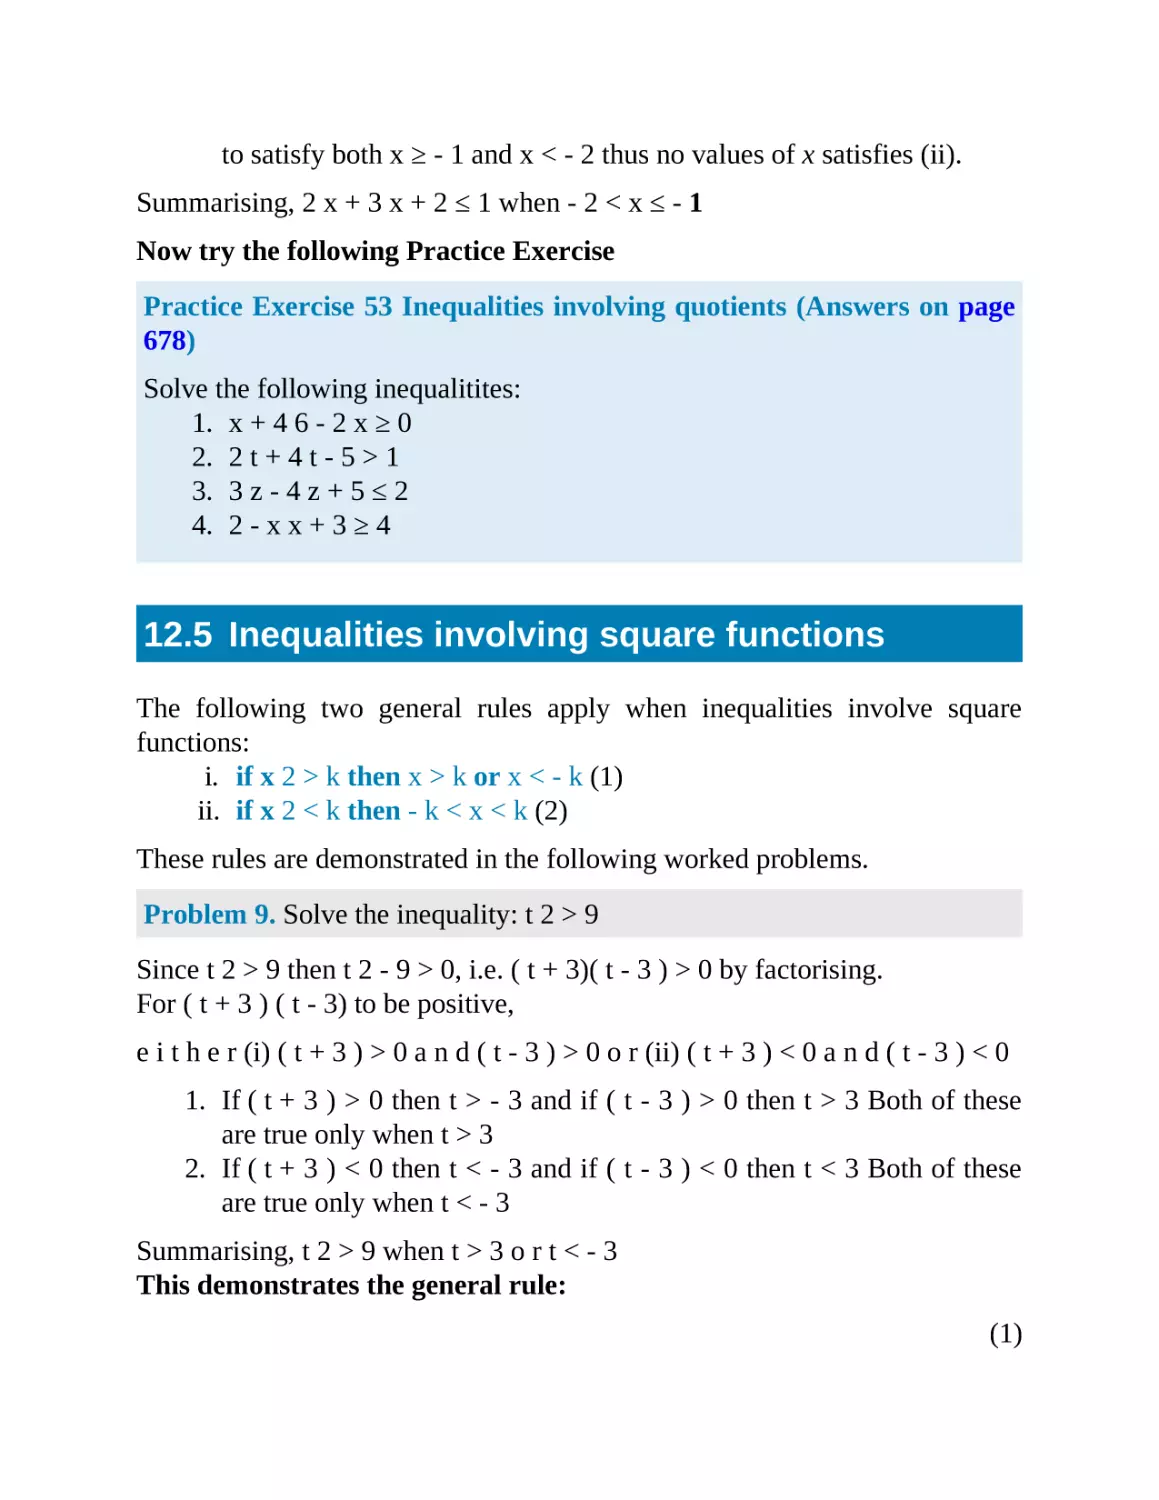 12.5 Inequalities involving square functions